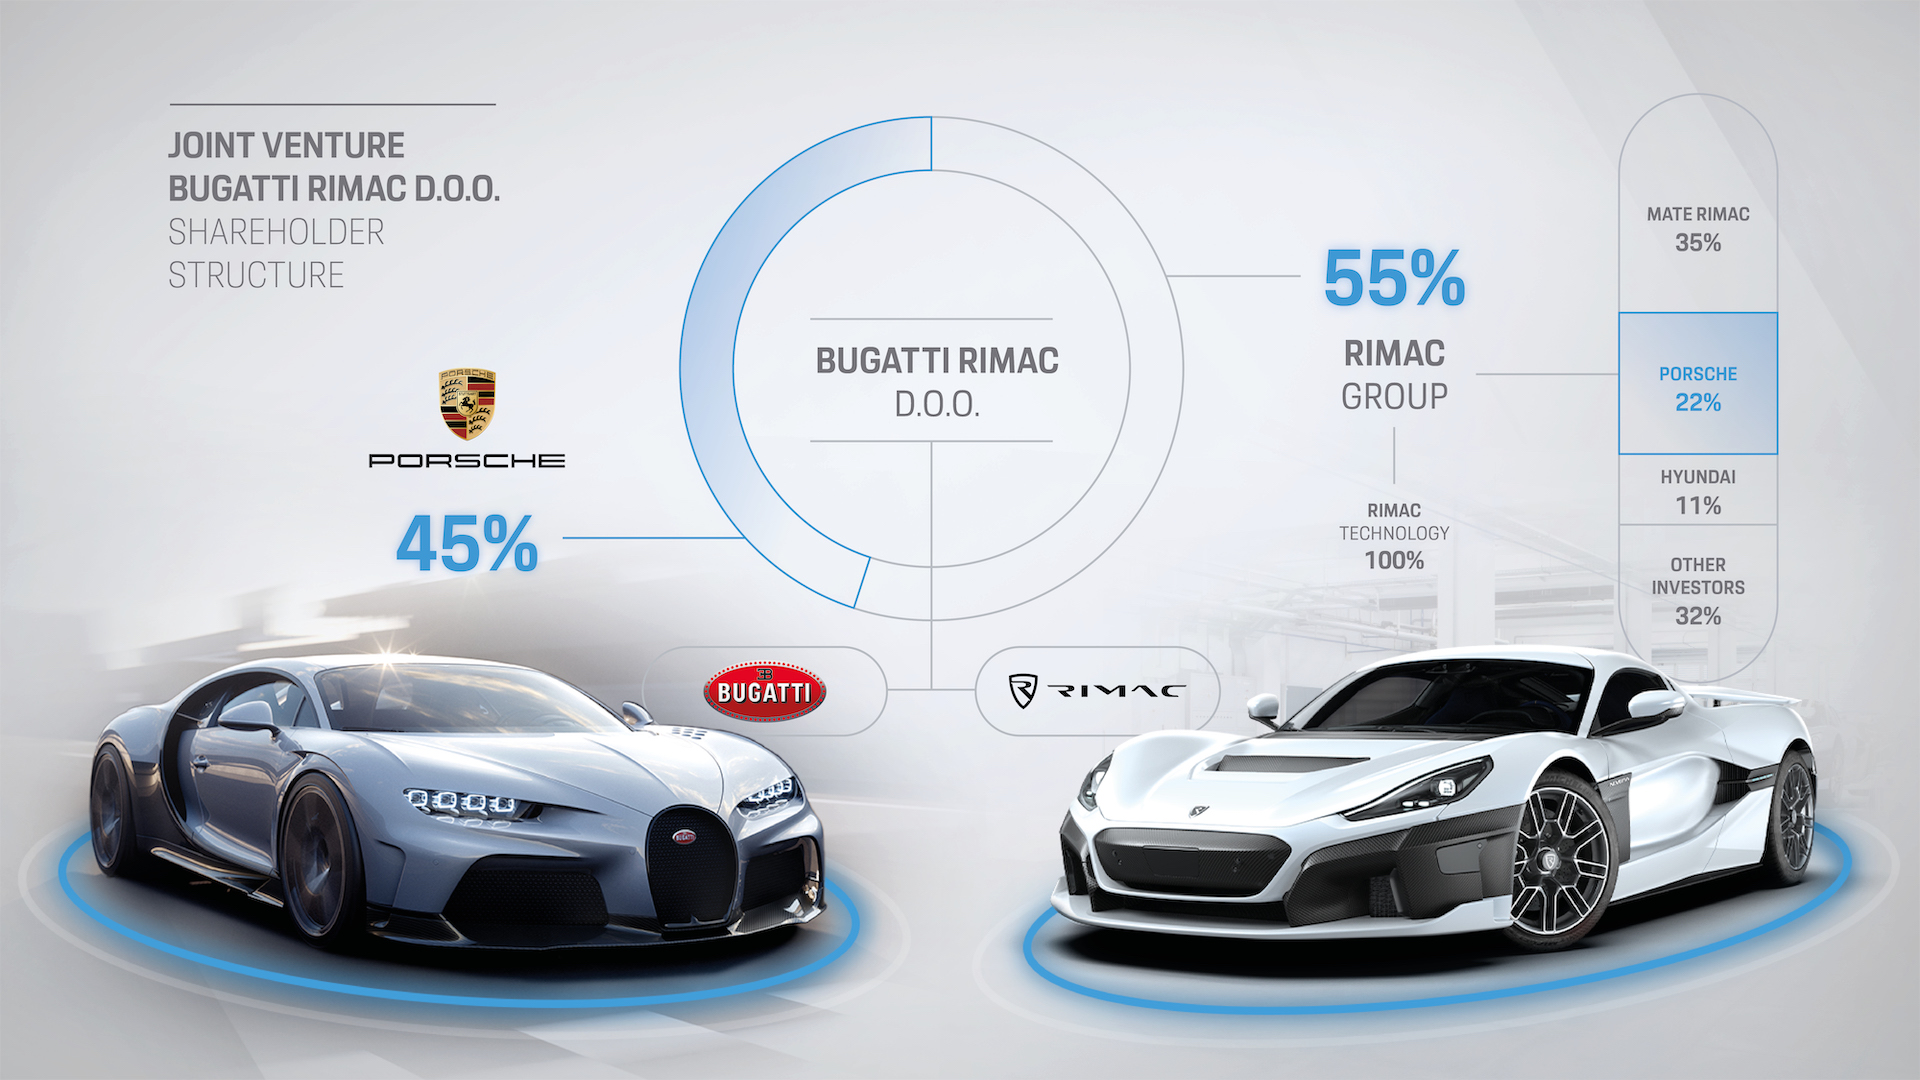 In a new funding round, Porsche expands relations with electric supercar company Rimac